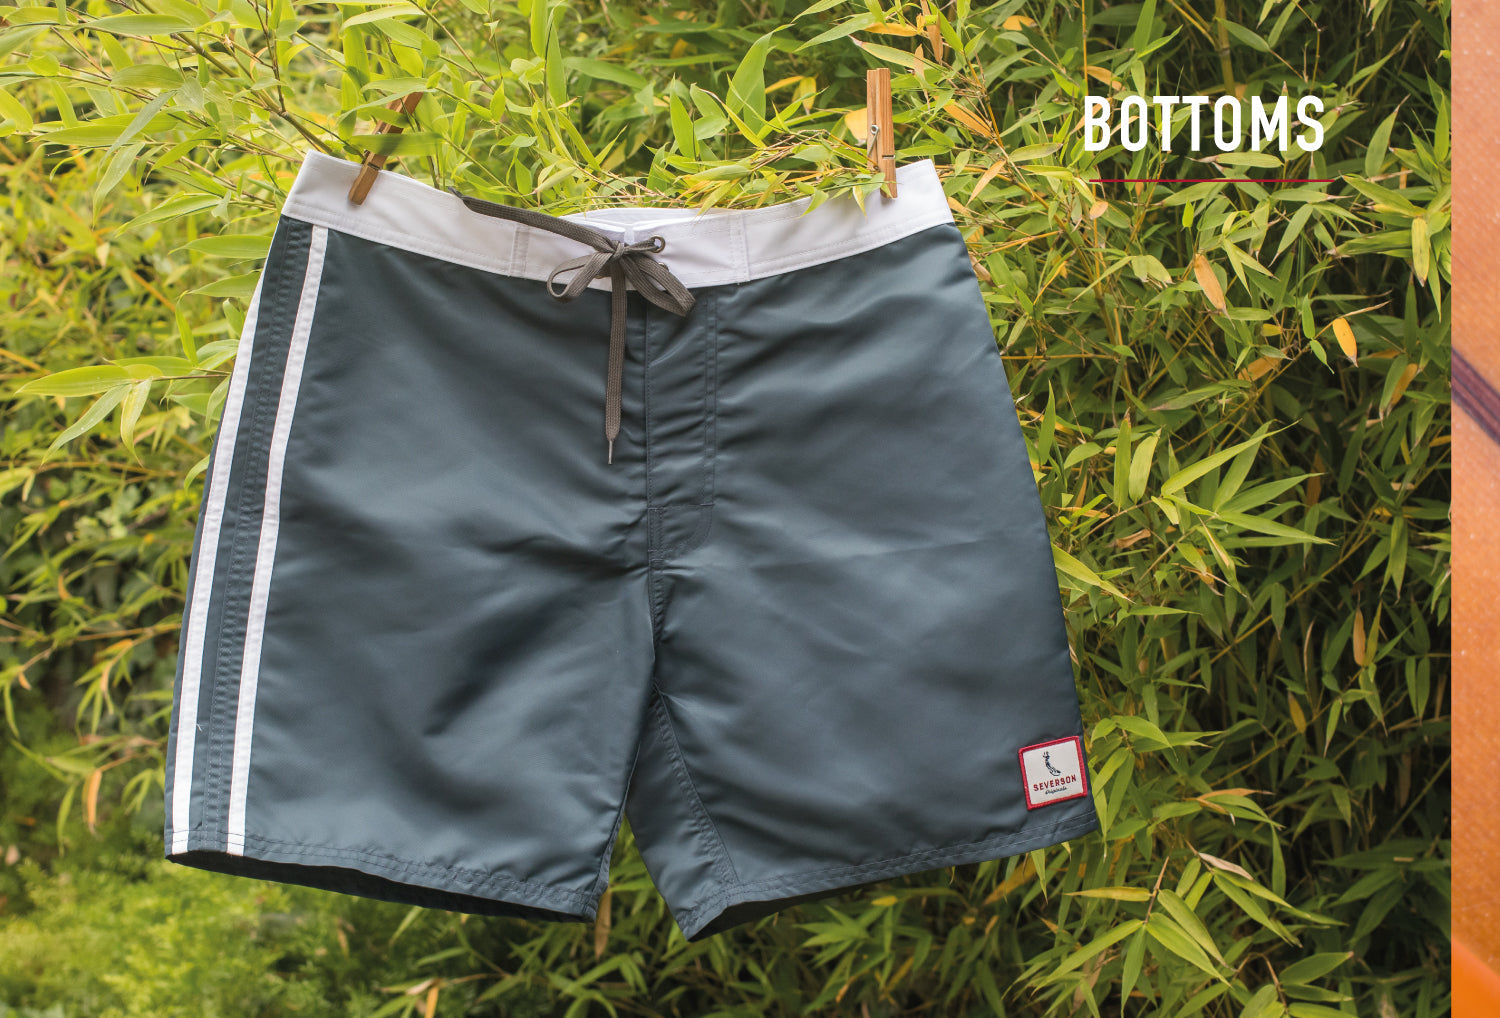 Classic style board shorts hanging in front of bamboo plant.